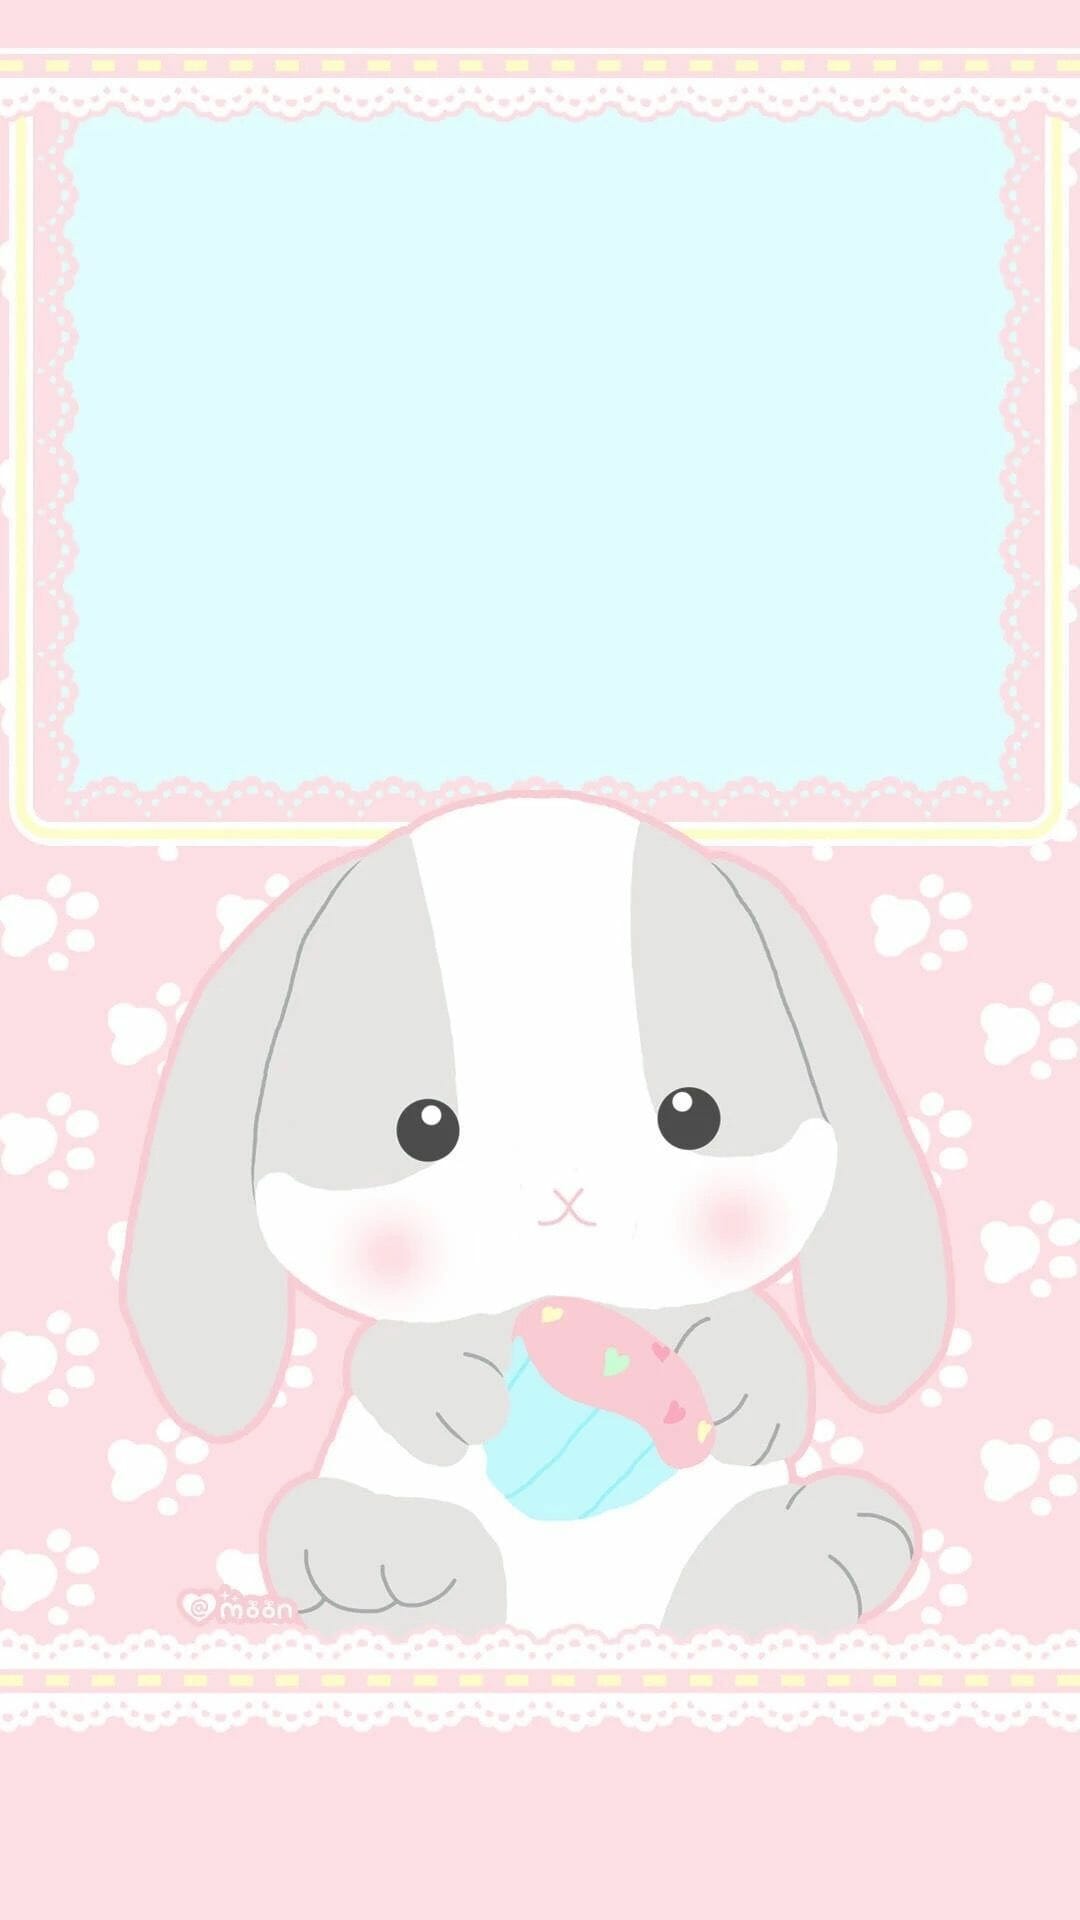 IPhone wallpaper with cute rabbit on pink background - Easter